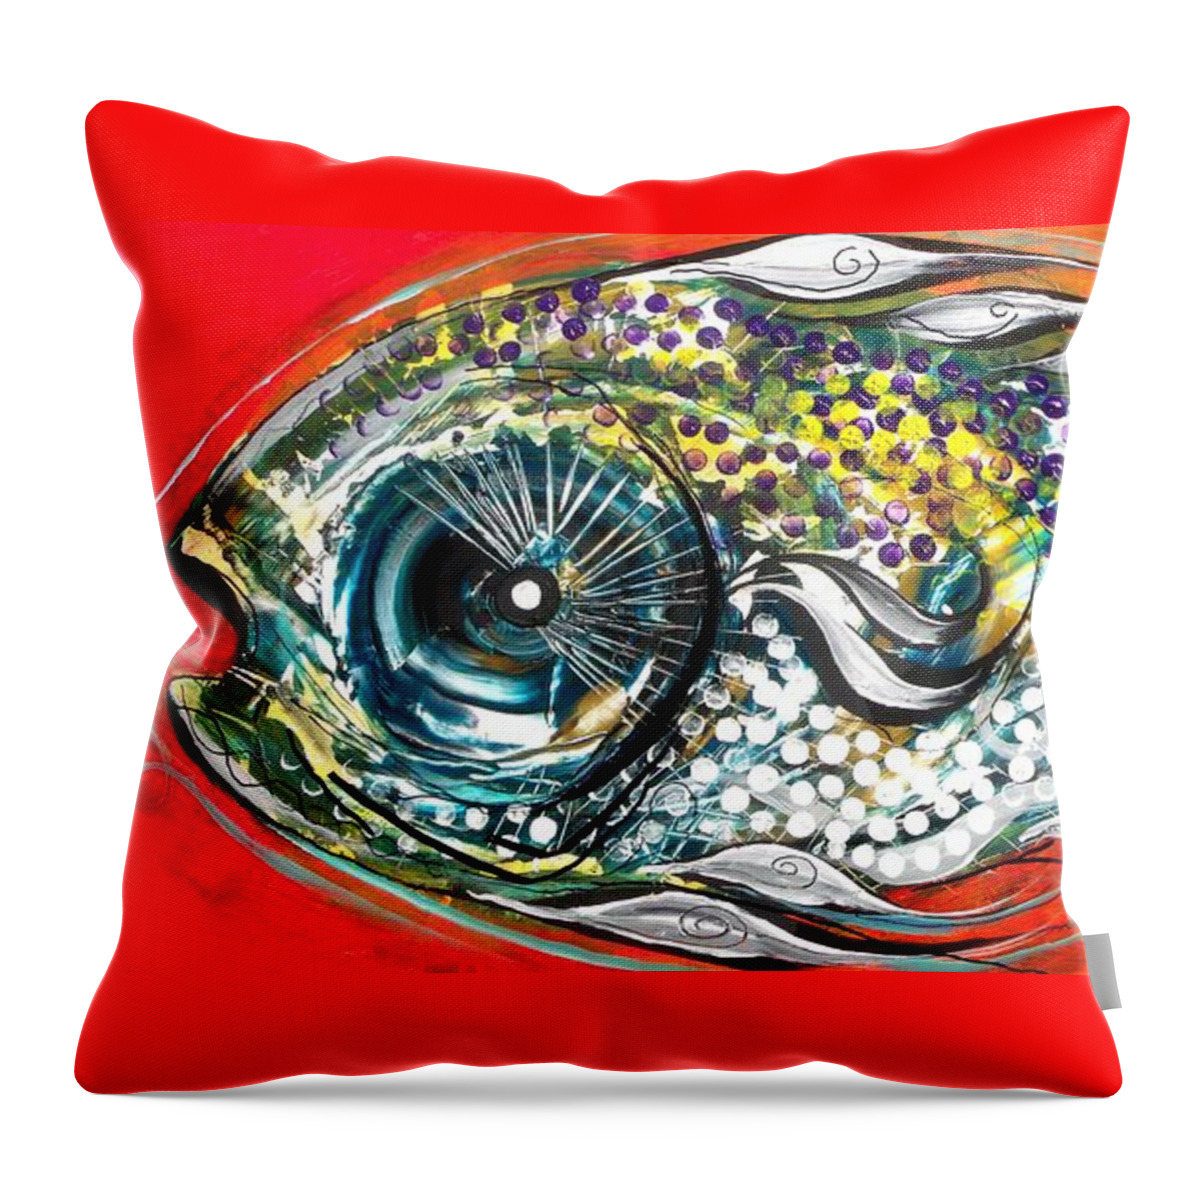 Fish Throw Pillow featuring the painting Mediterranean Fish by J Vincent Scarpace